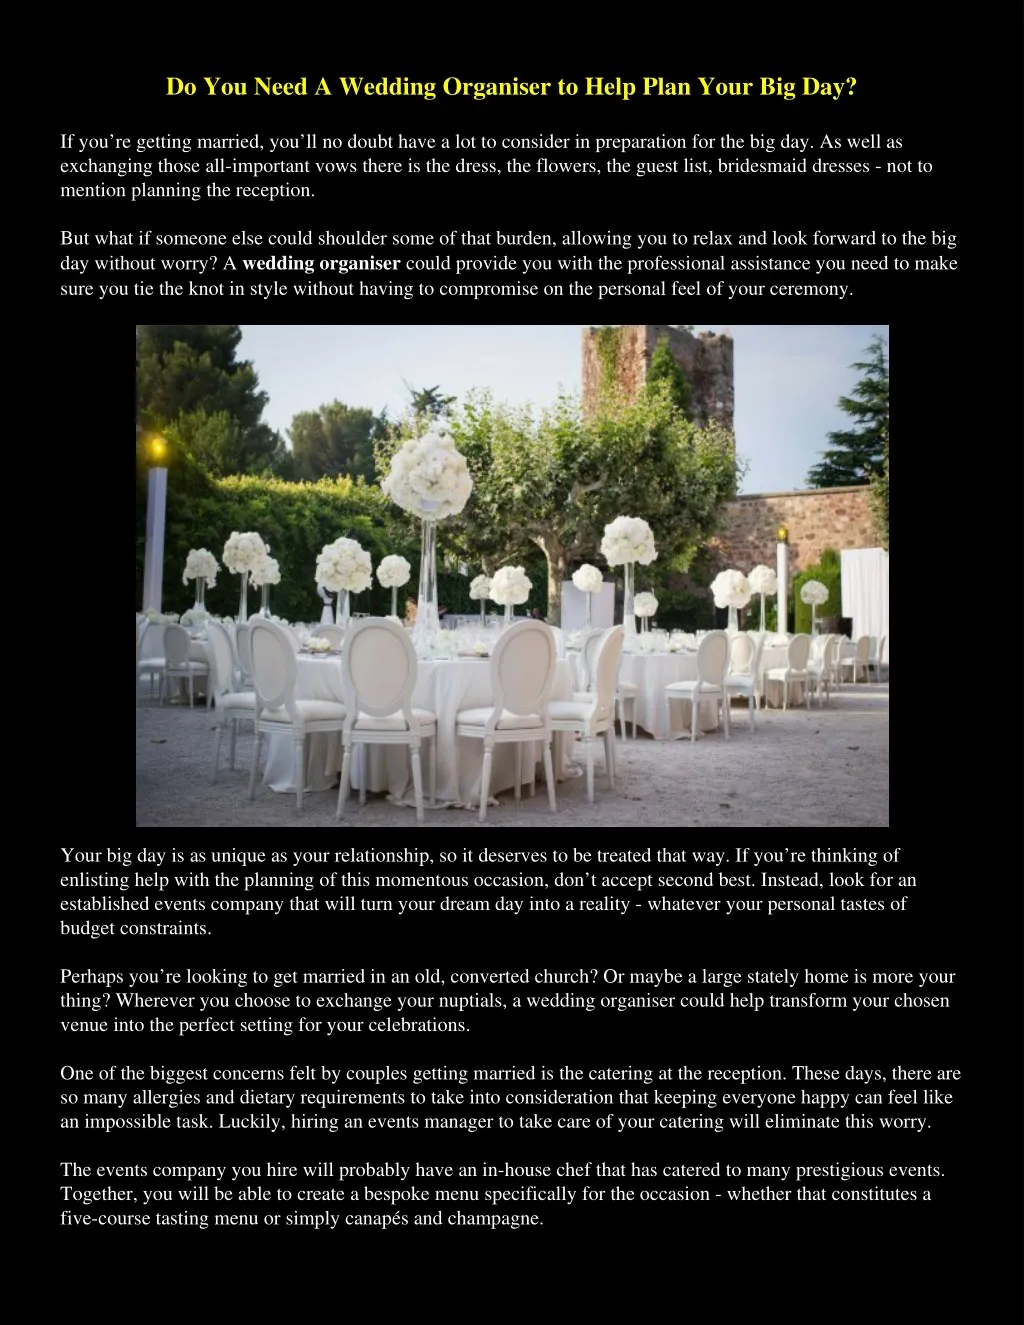 do you need a wedding organiser to help plan your